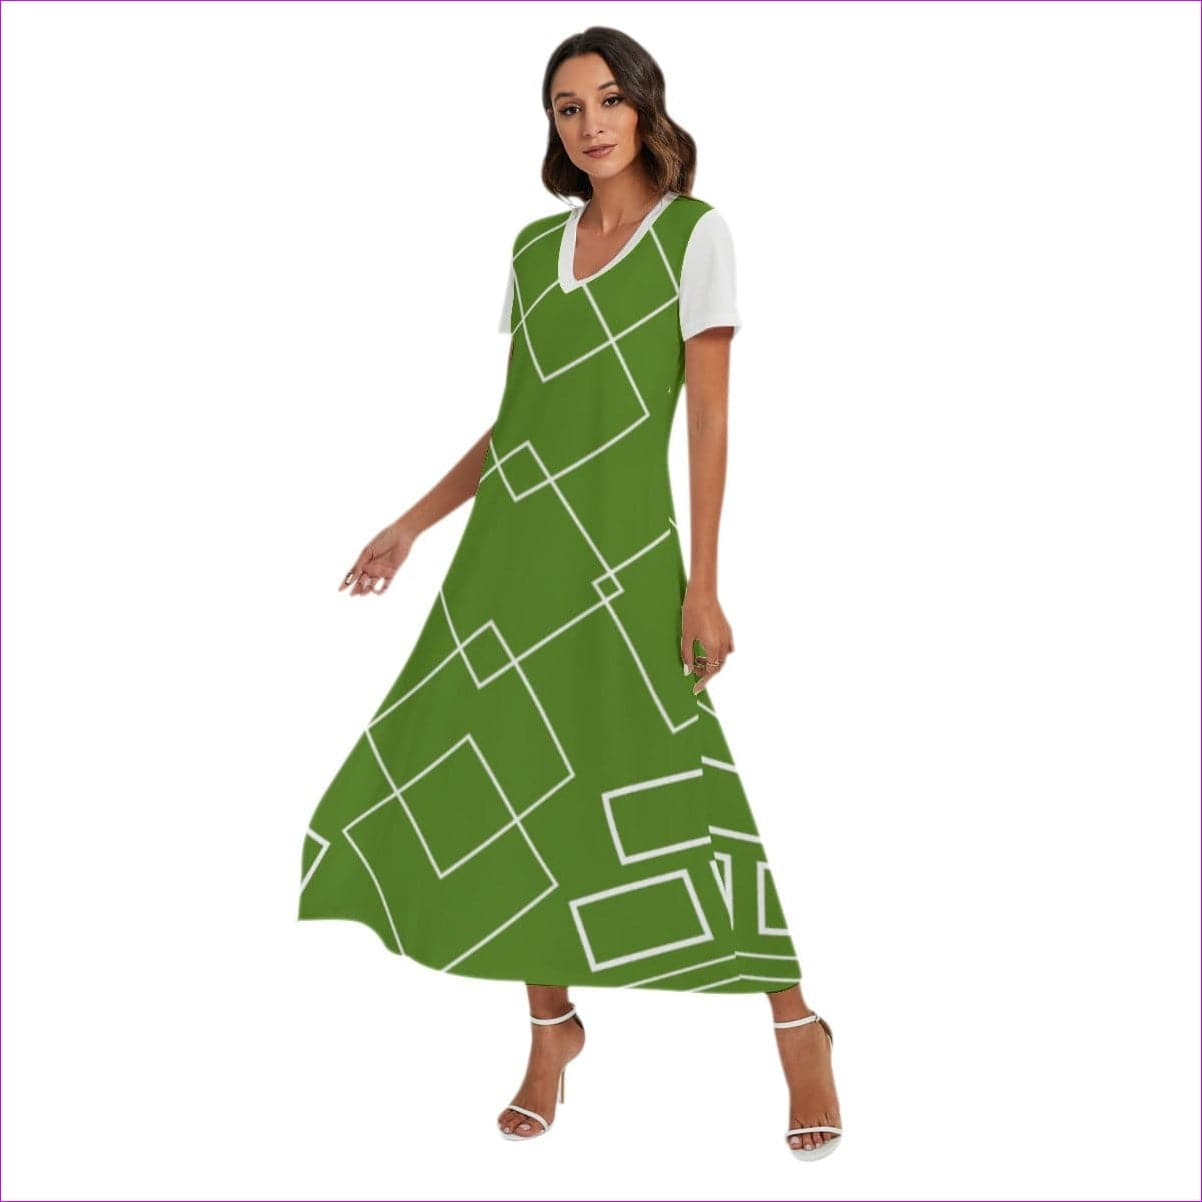 Shaped Out Women's Green V-neck Dress With Short Sleeve - women's dress at TFC&H Co.